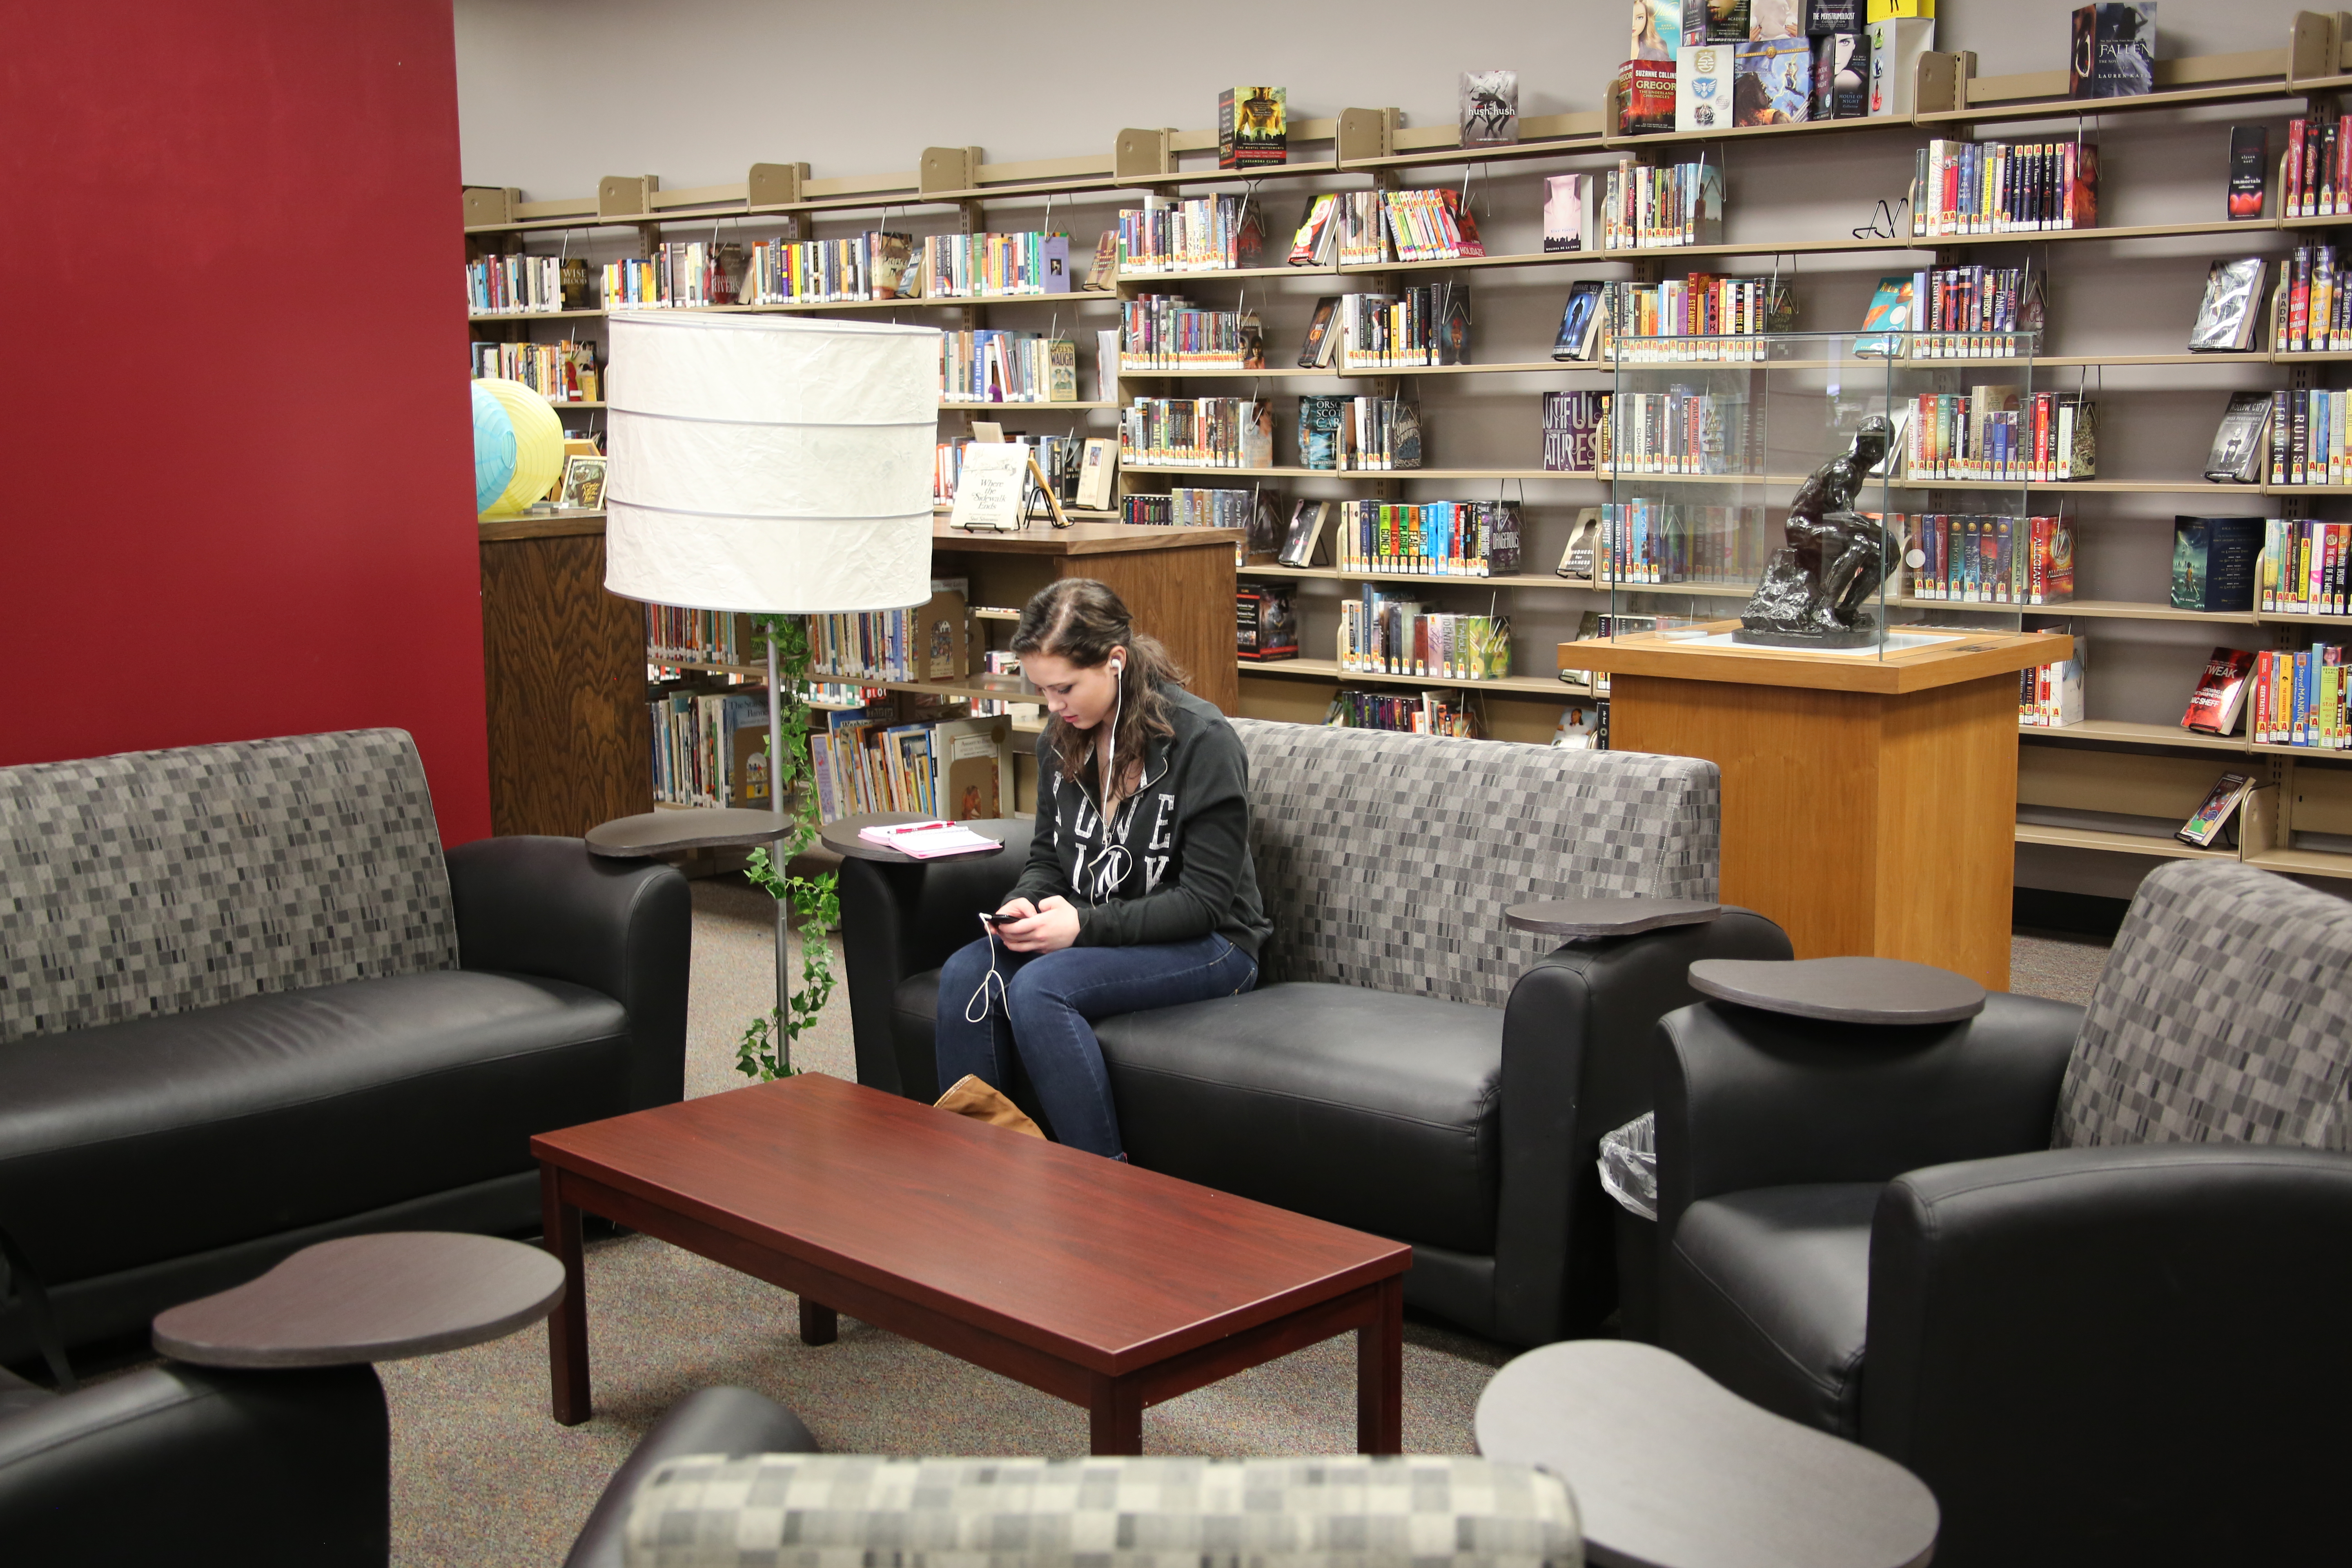 Student sitting on the couch in the library